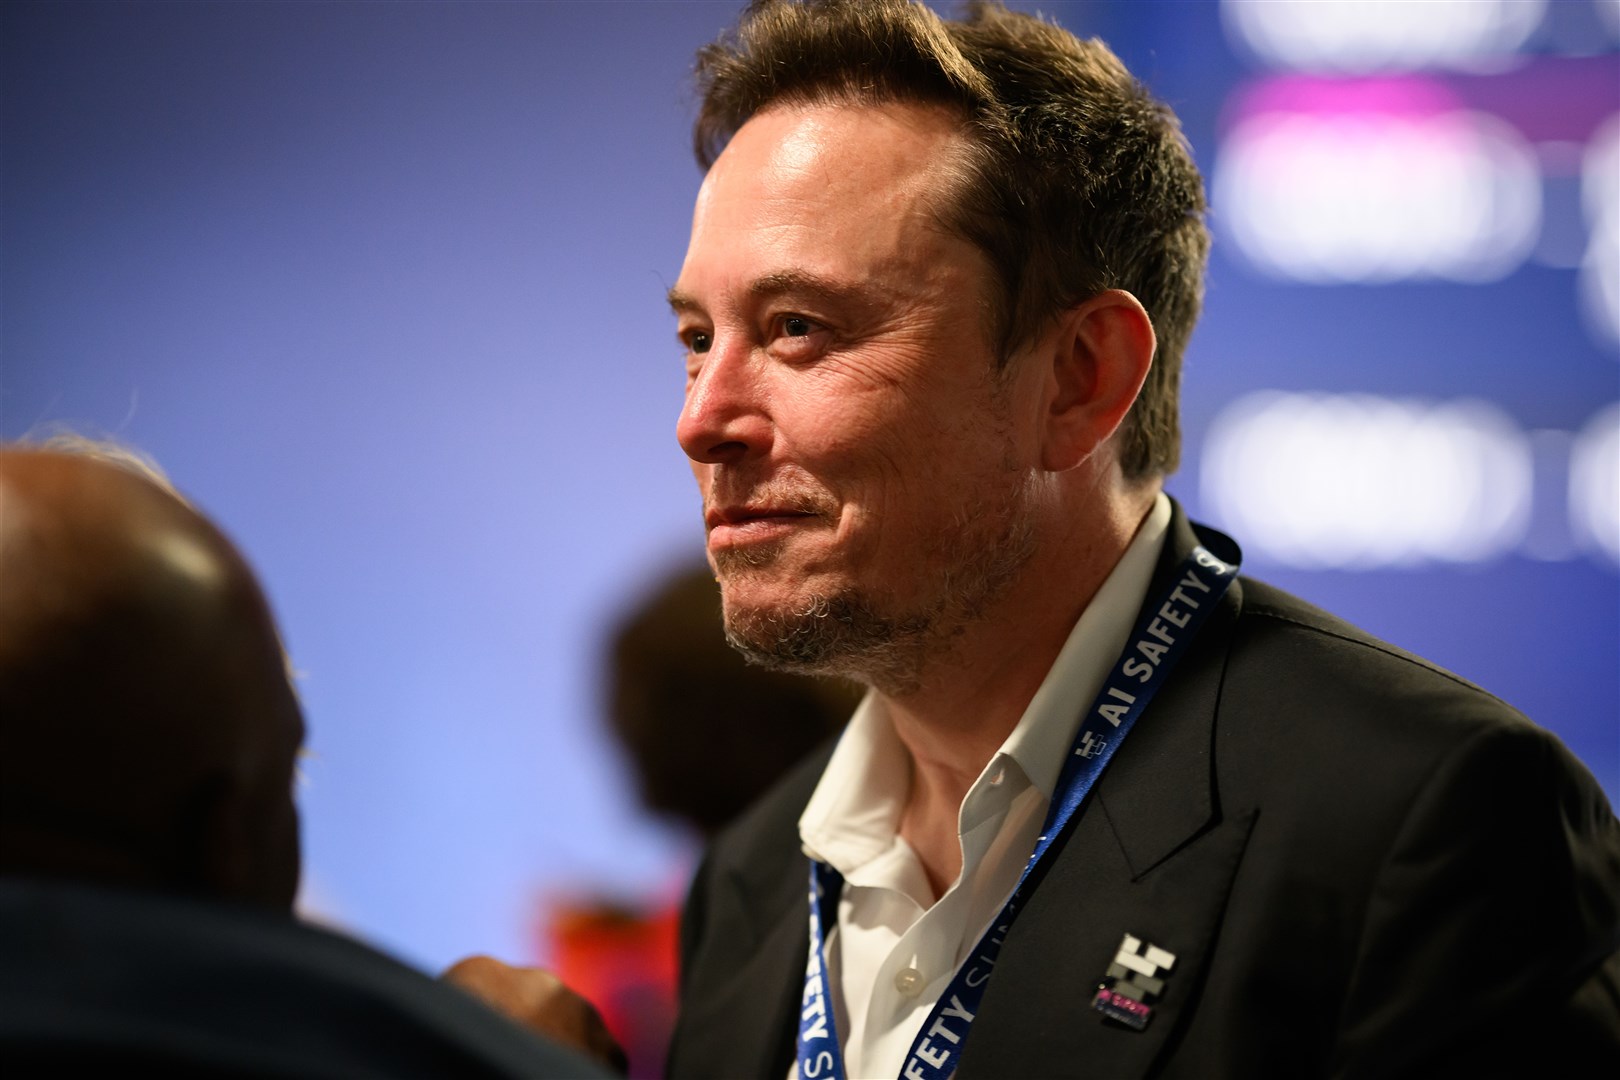 Elon Musk during the AI Safety Summit (Leon Neal/PA)